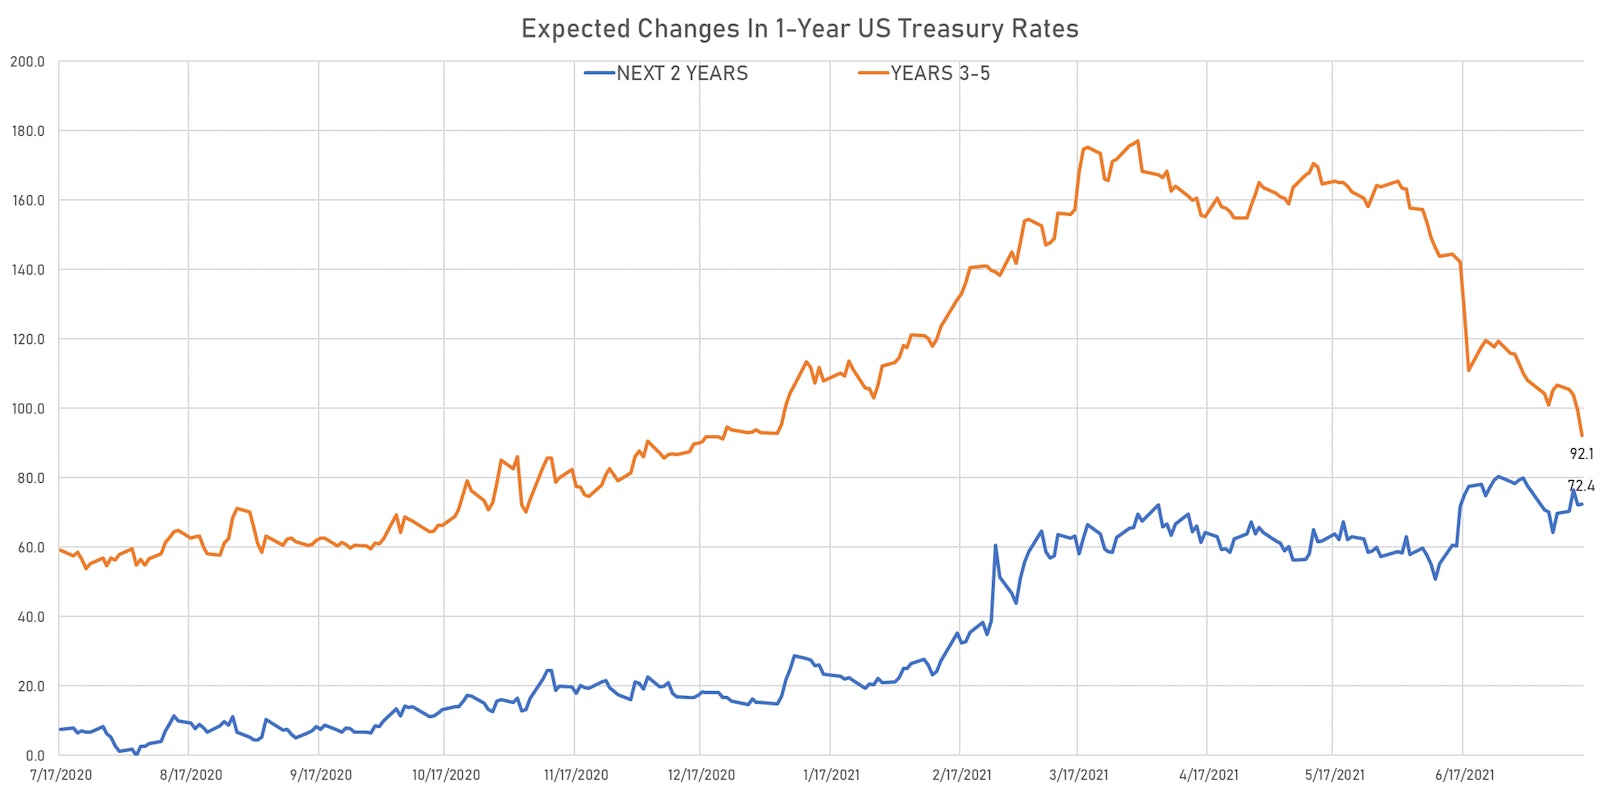 Rates markets have drastically changed their Fed hikes expectations since March | Sources: ϕpost, Refinitiv data